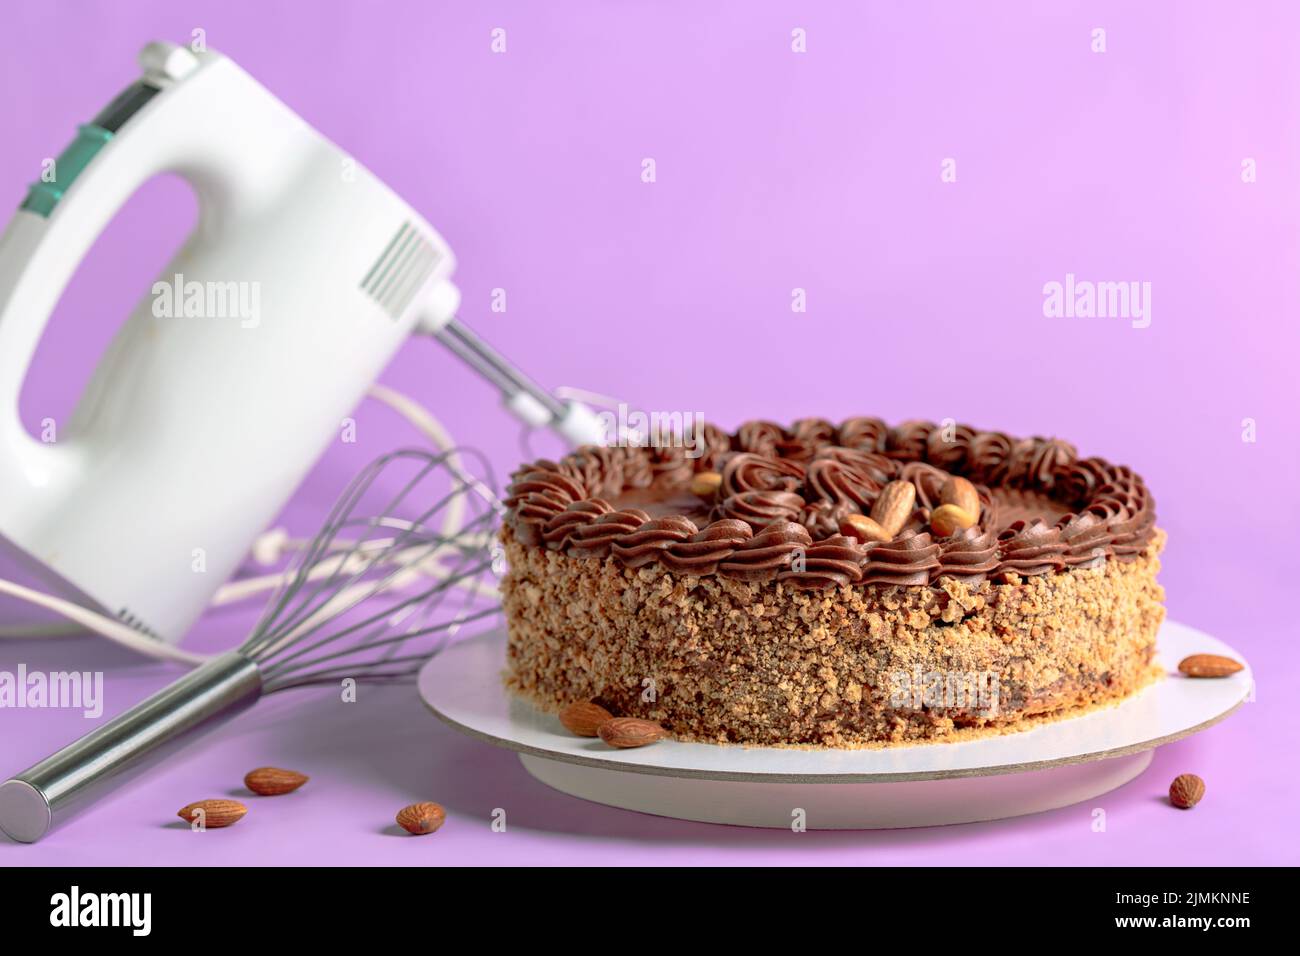 Almond cake with butter chocolate cream. Stock Photo